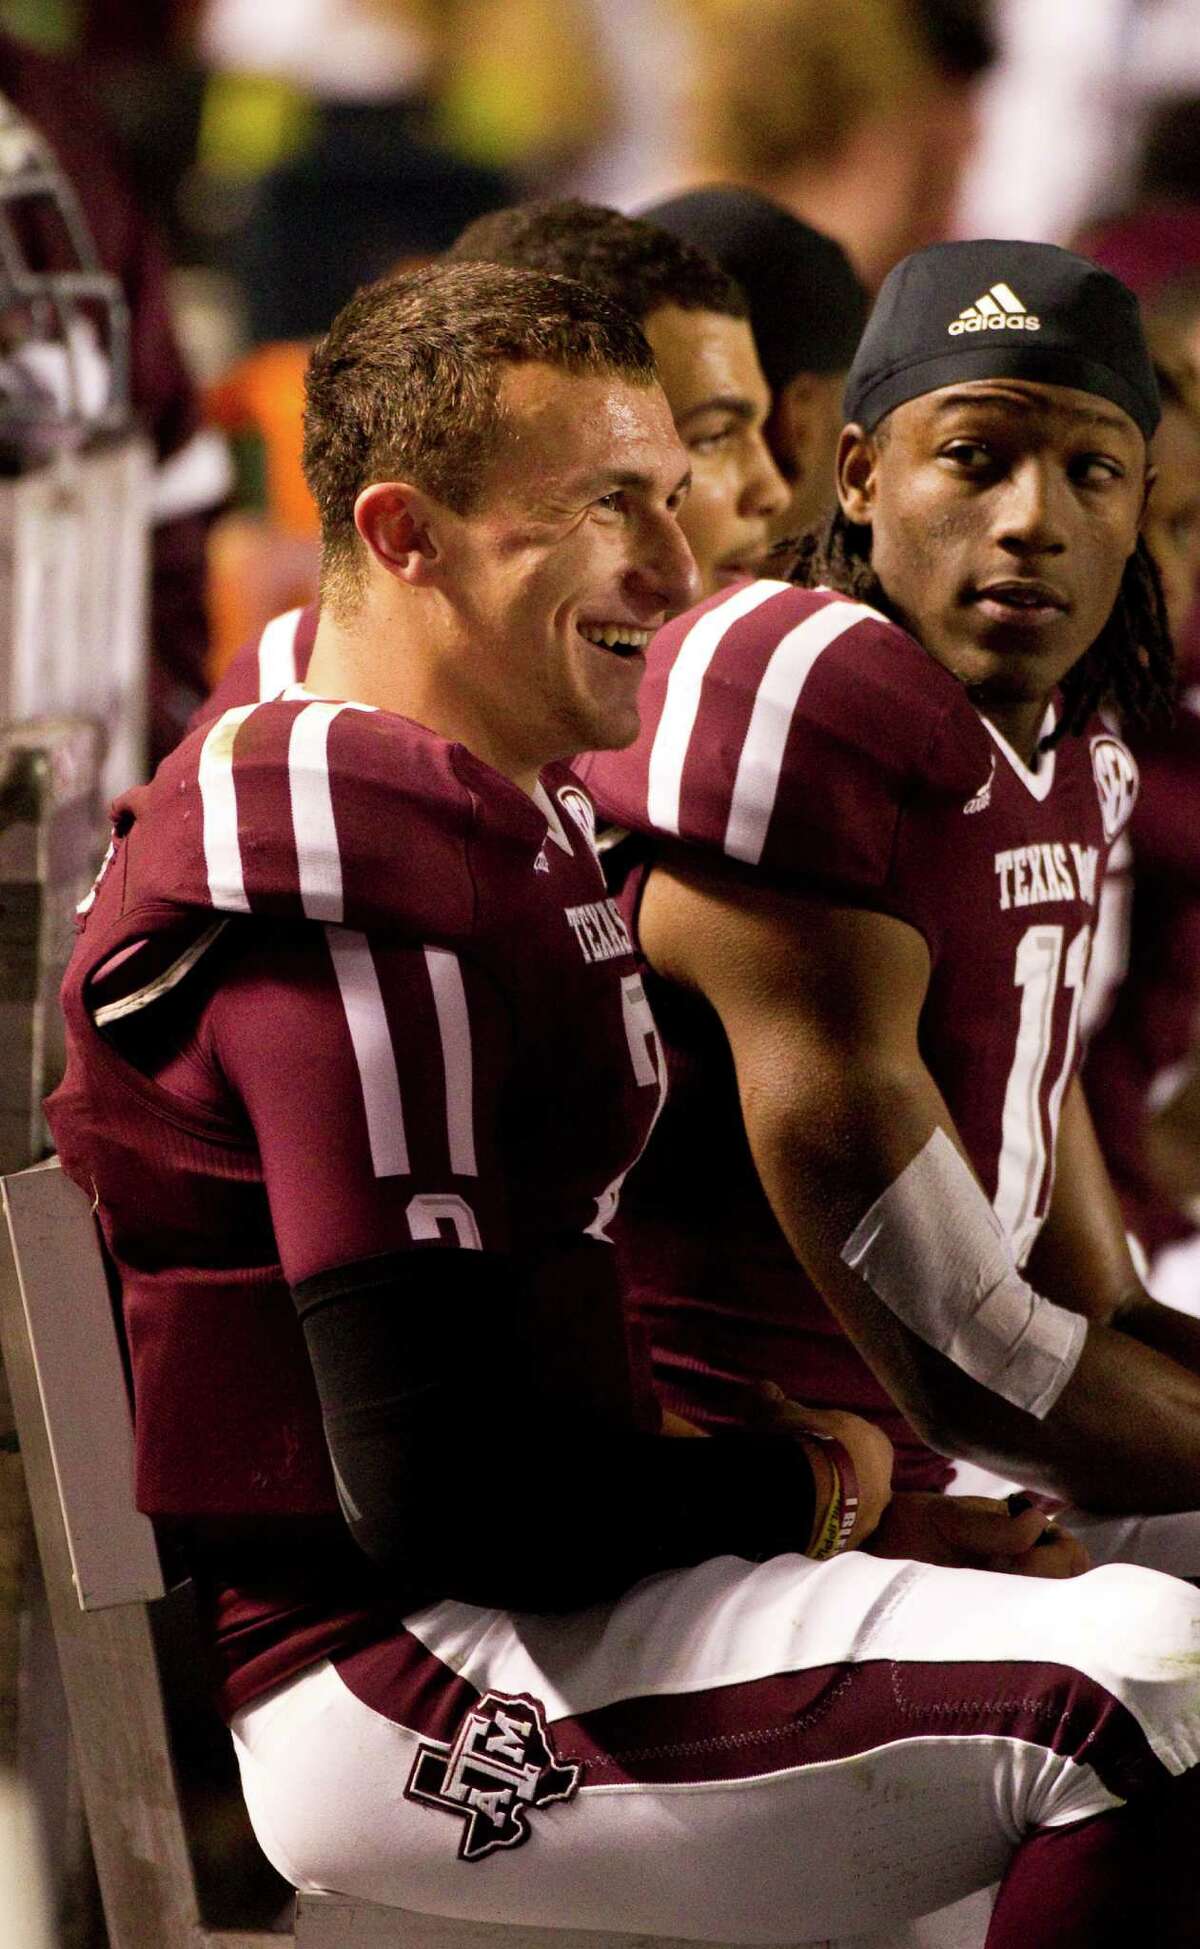 Texas A&M quarterback Johnny Manziel (2) talks to teammates on the bench during the second quarter of a NCAA football game against Missouri, Saturday, Nov. 24, 2012, in Kyle Field in College Station.